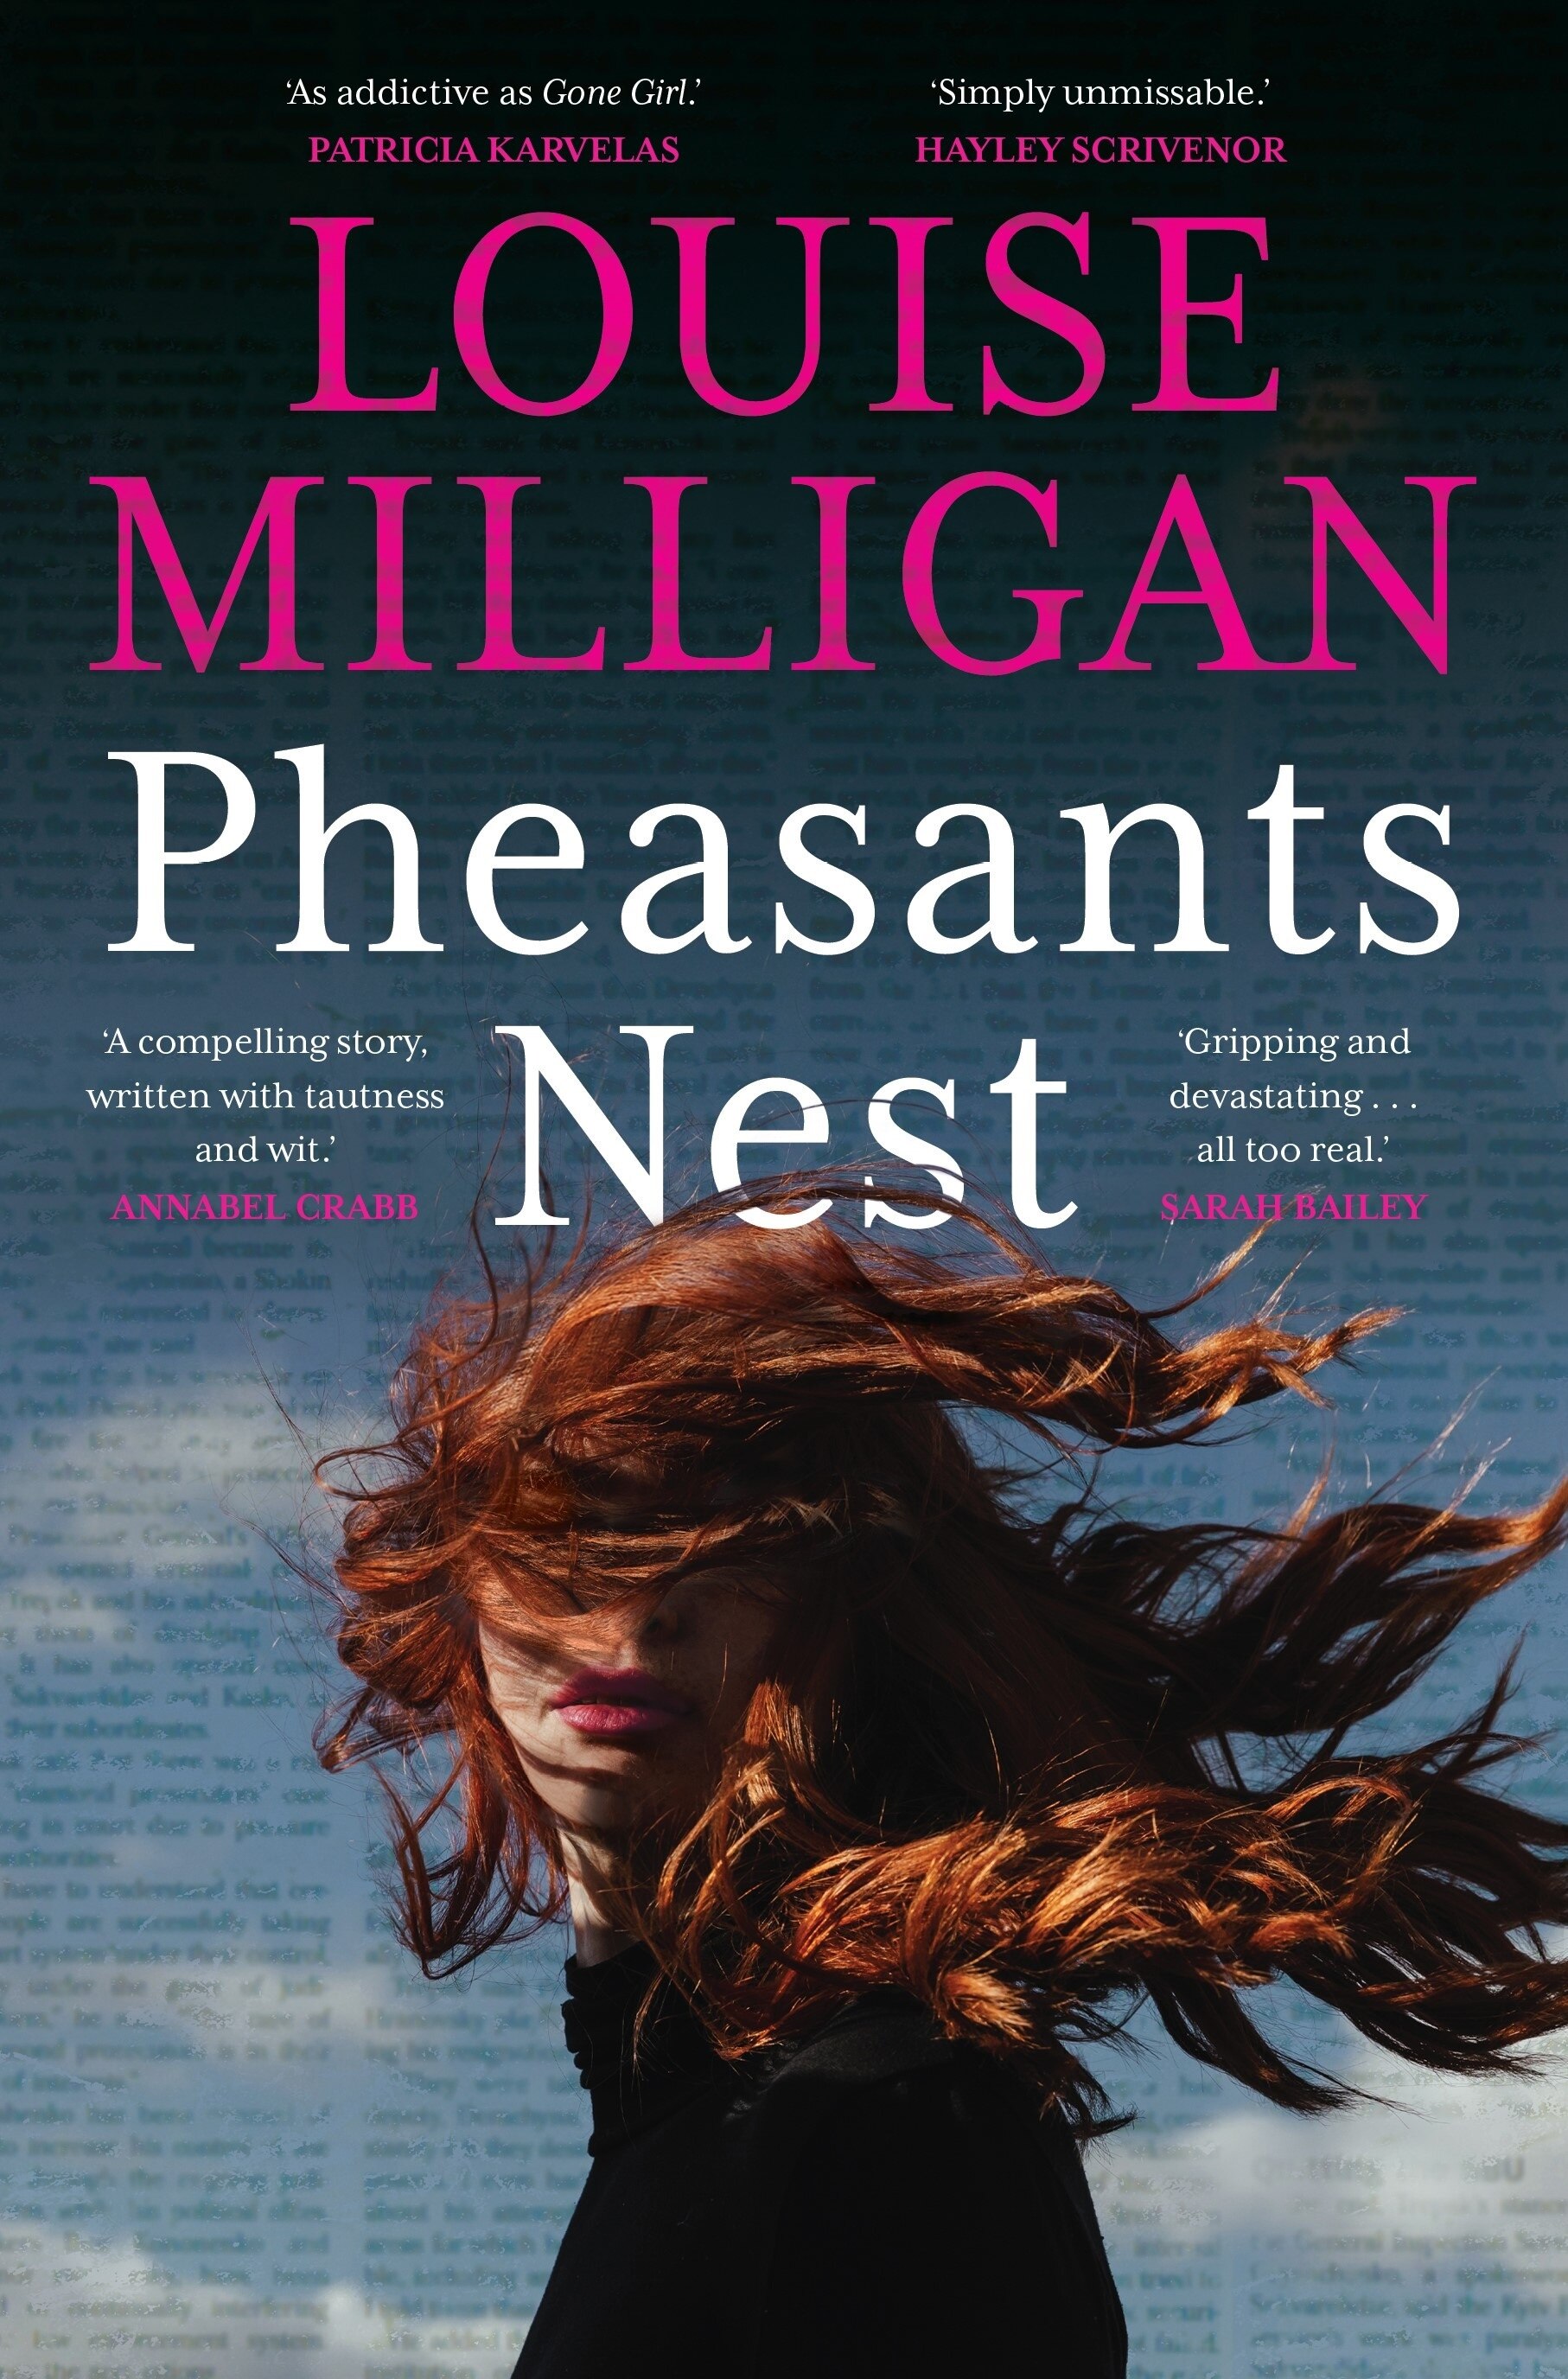 A book cover showing a woman obscured by her long, windswept red hair against a blue background.